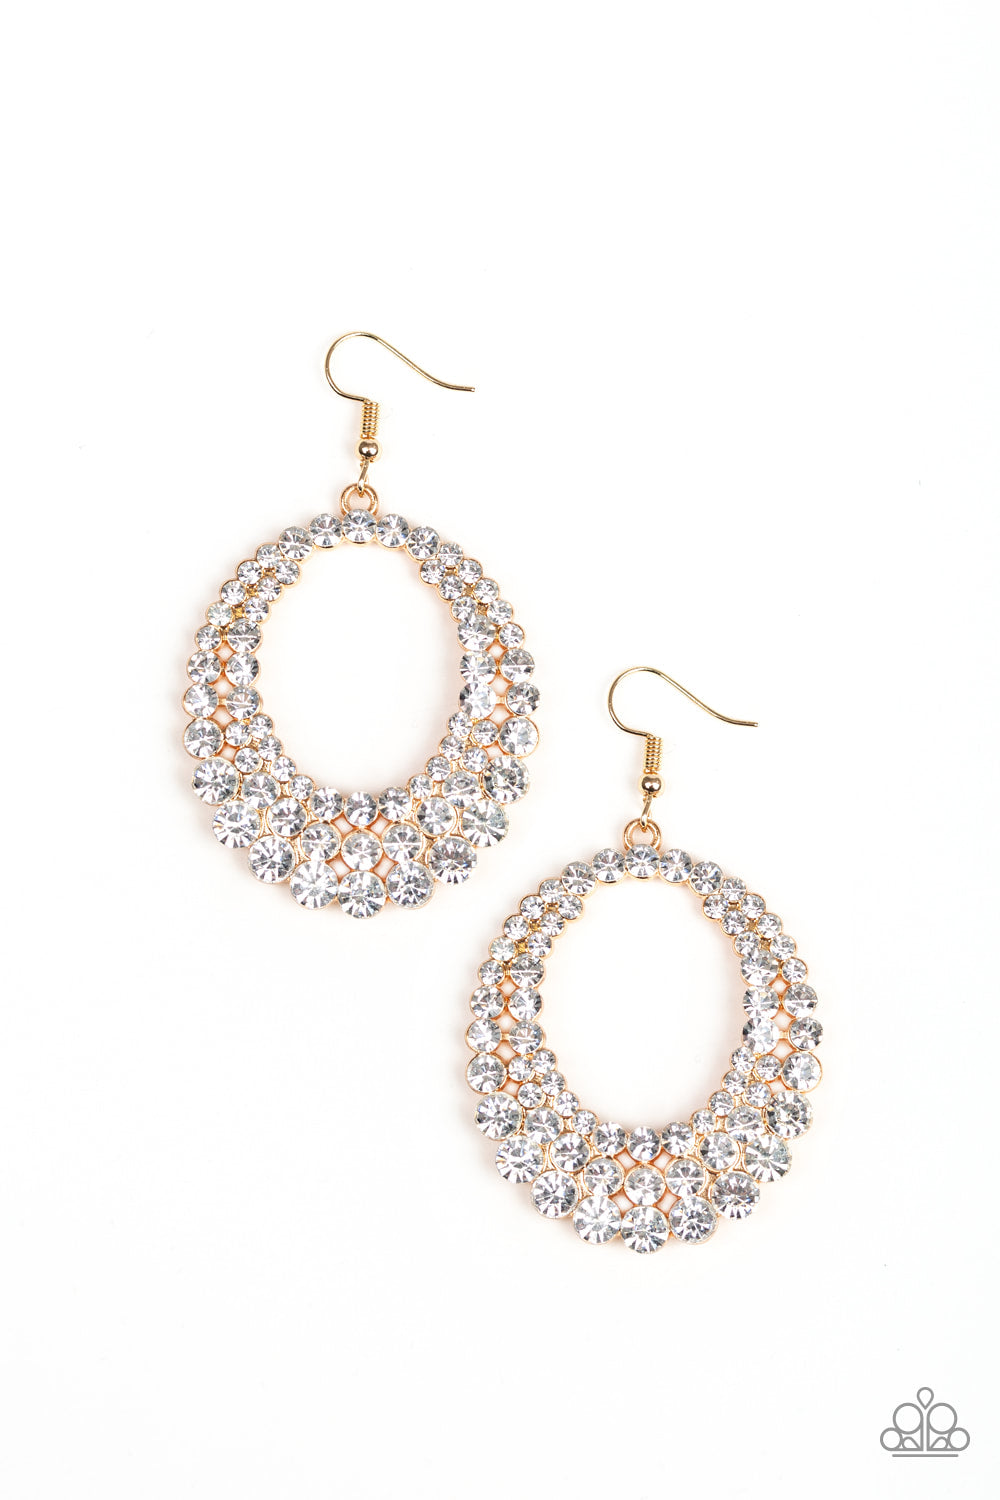 Universal Shimmer - Gold - Earrings - Paparazzi Accessories